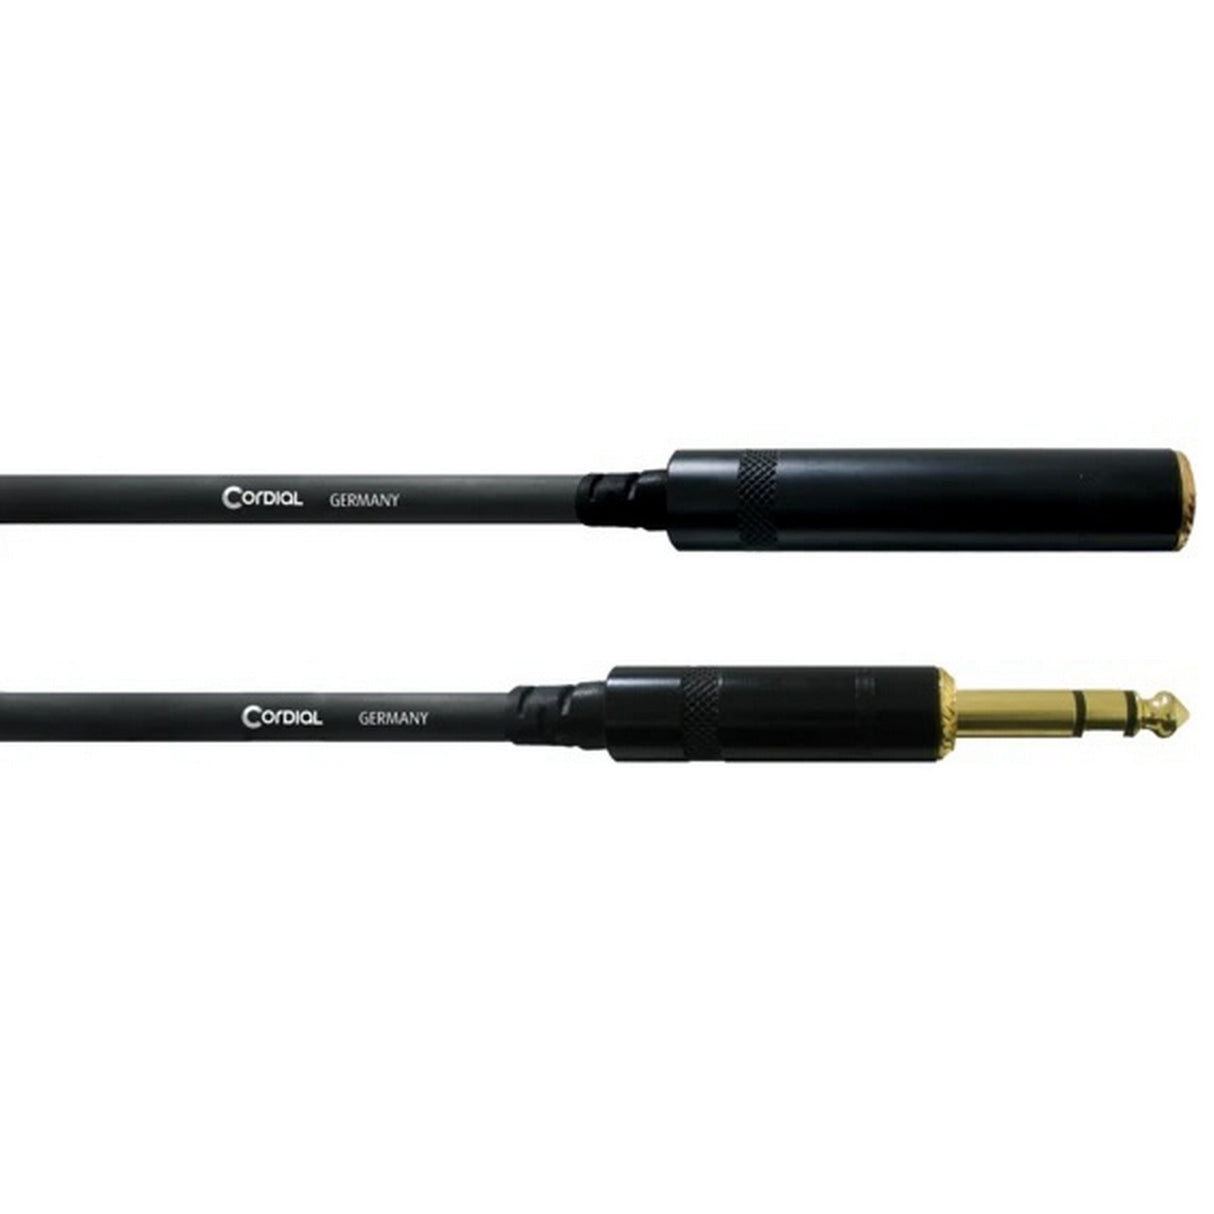 Cordial CFM 3 VK Stereo 1/4-Inch TRS to 1/4-Inch Stereo Female Cable, Black, 10-Feet